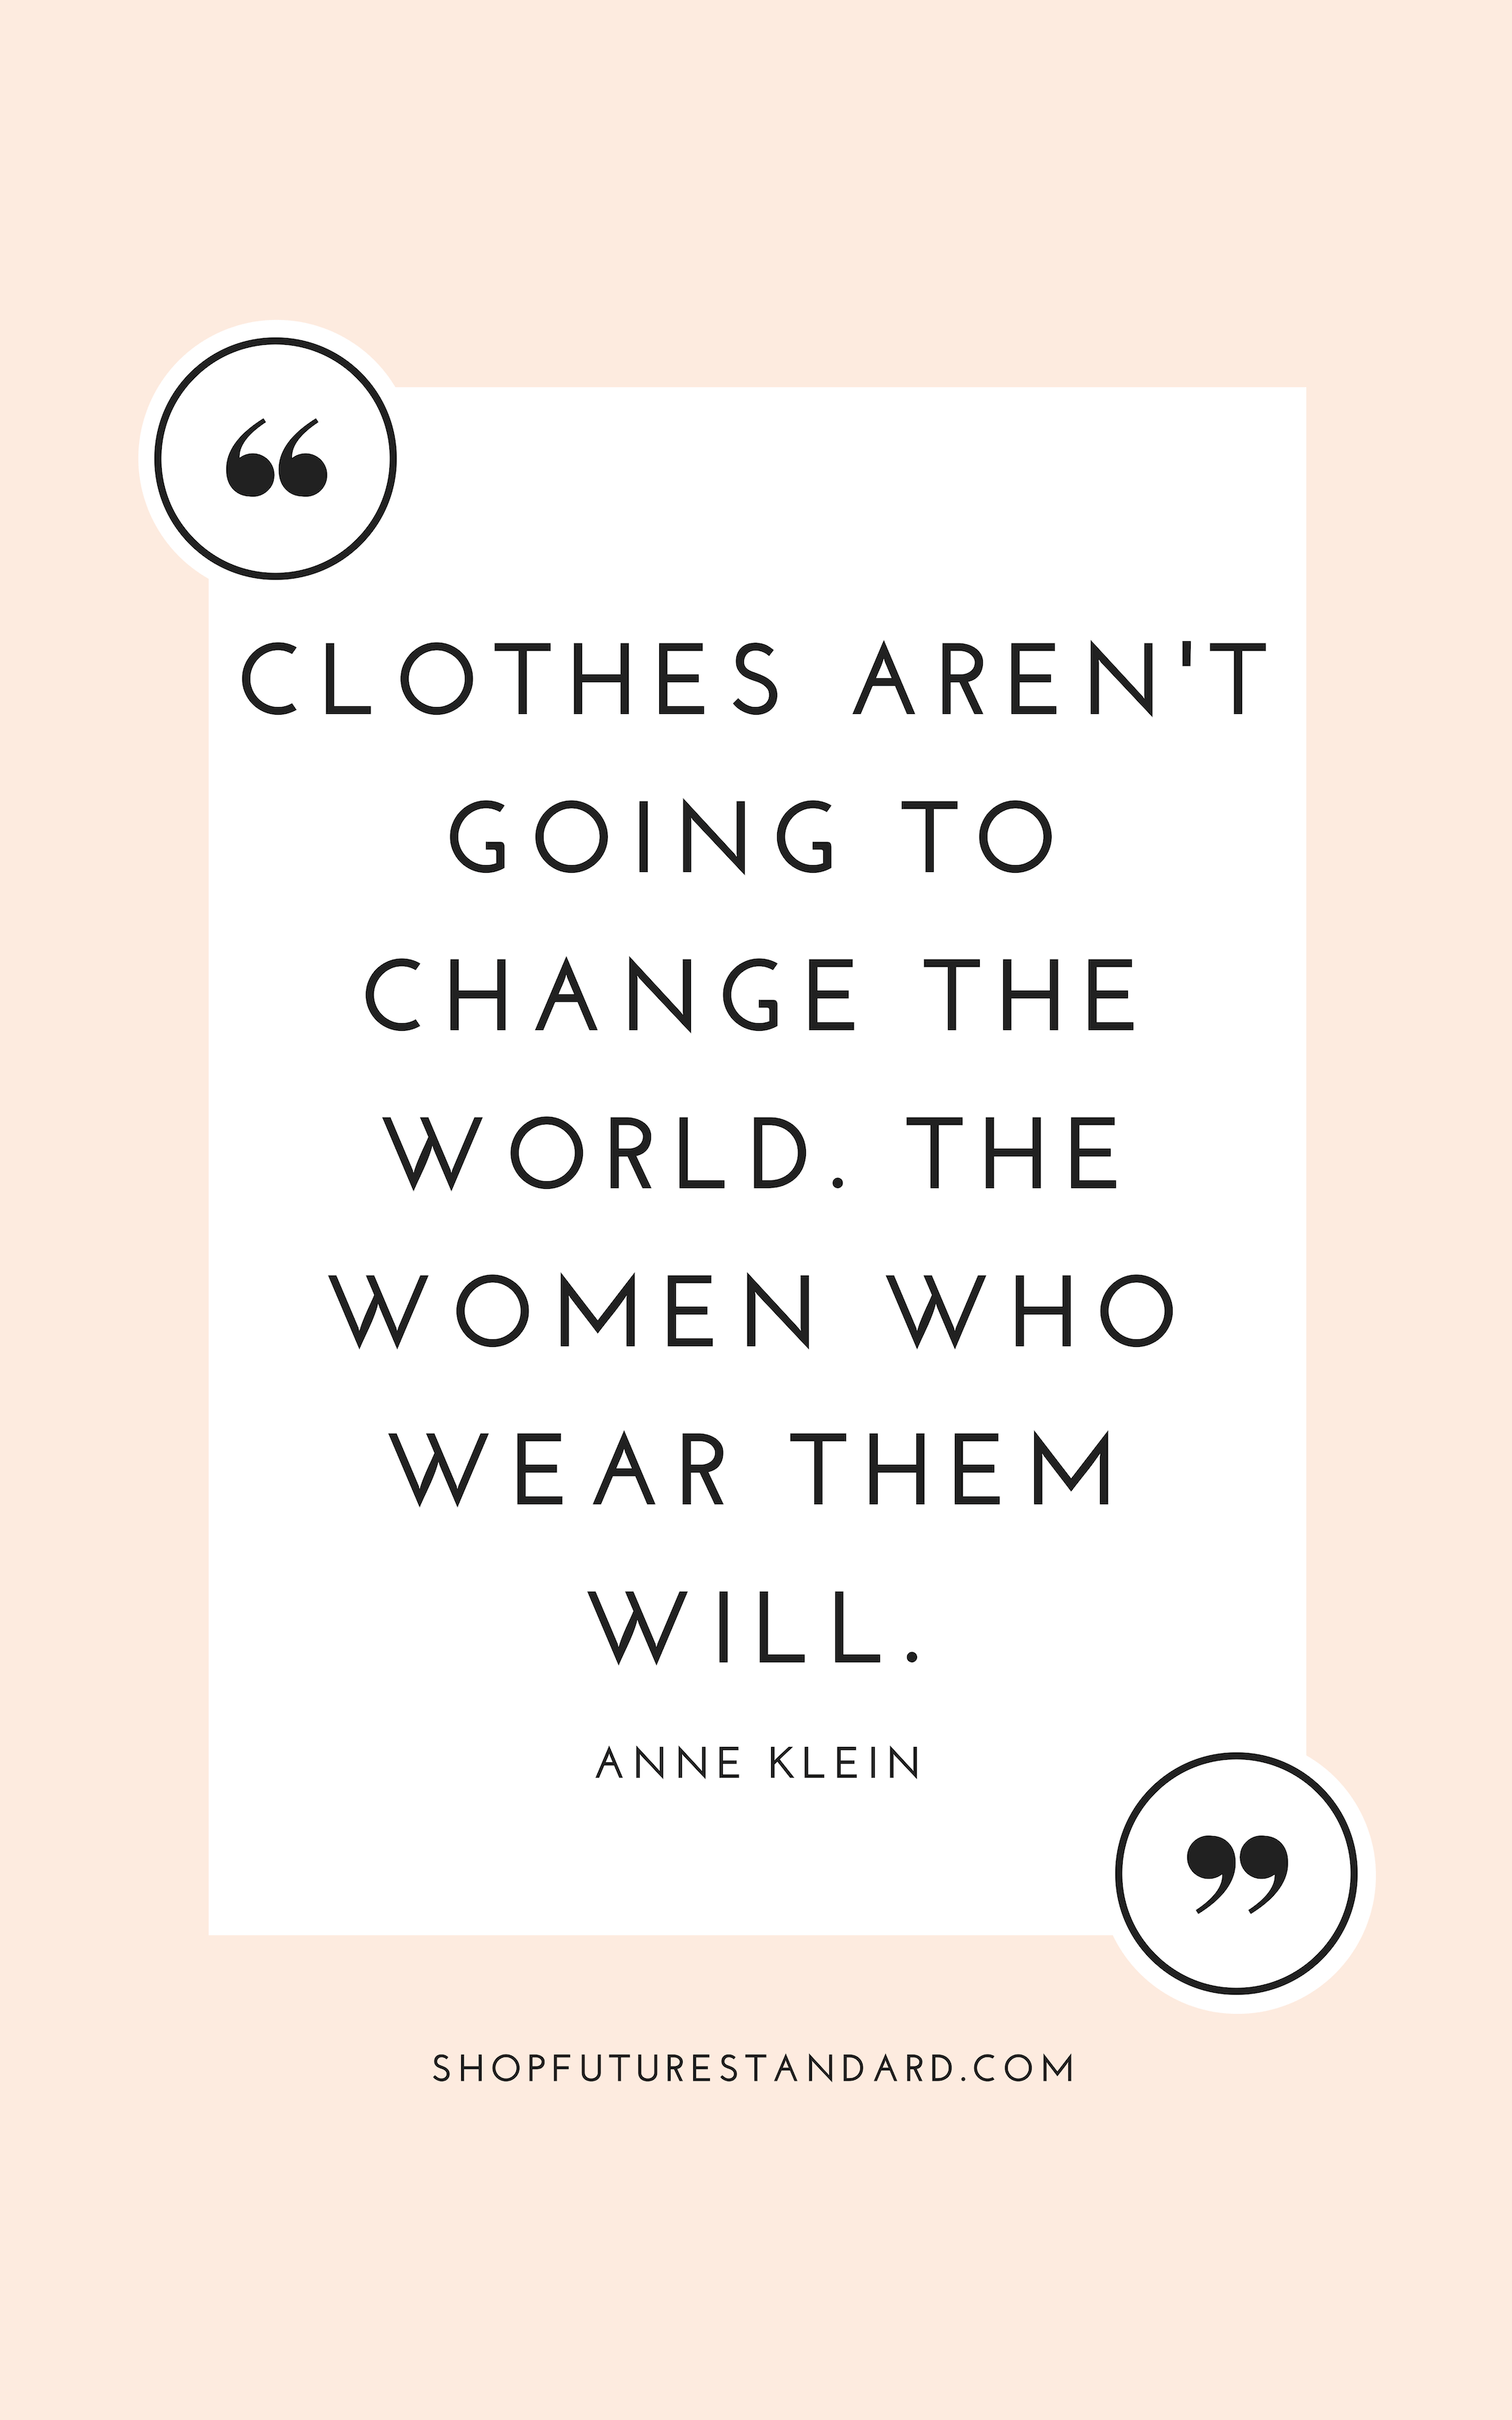 11 Ethical Style Quotes To Inspire More Conscious Living - 11 Ethical Style Quotes To Inspire More Conscious Living -   19 different style Quotes ideas